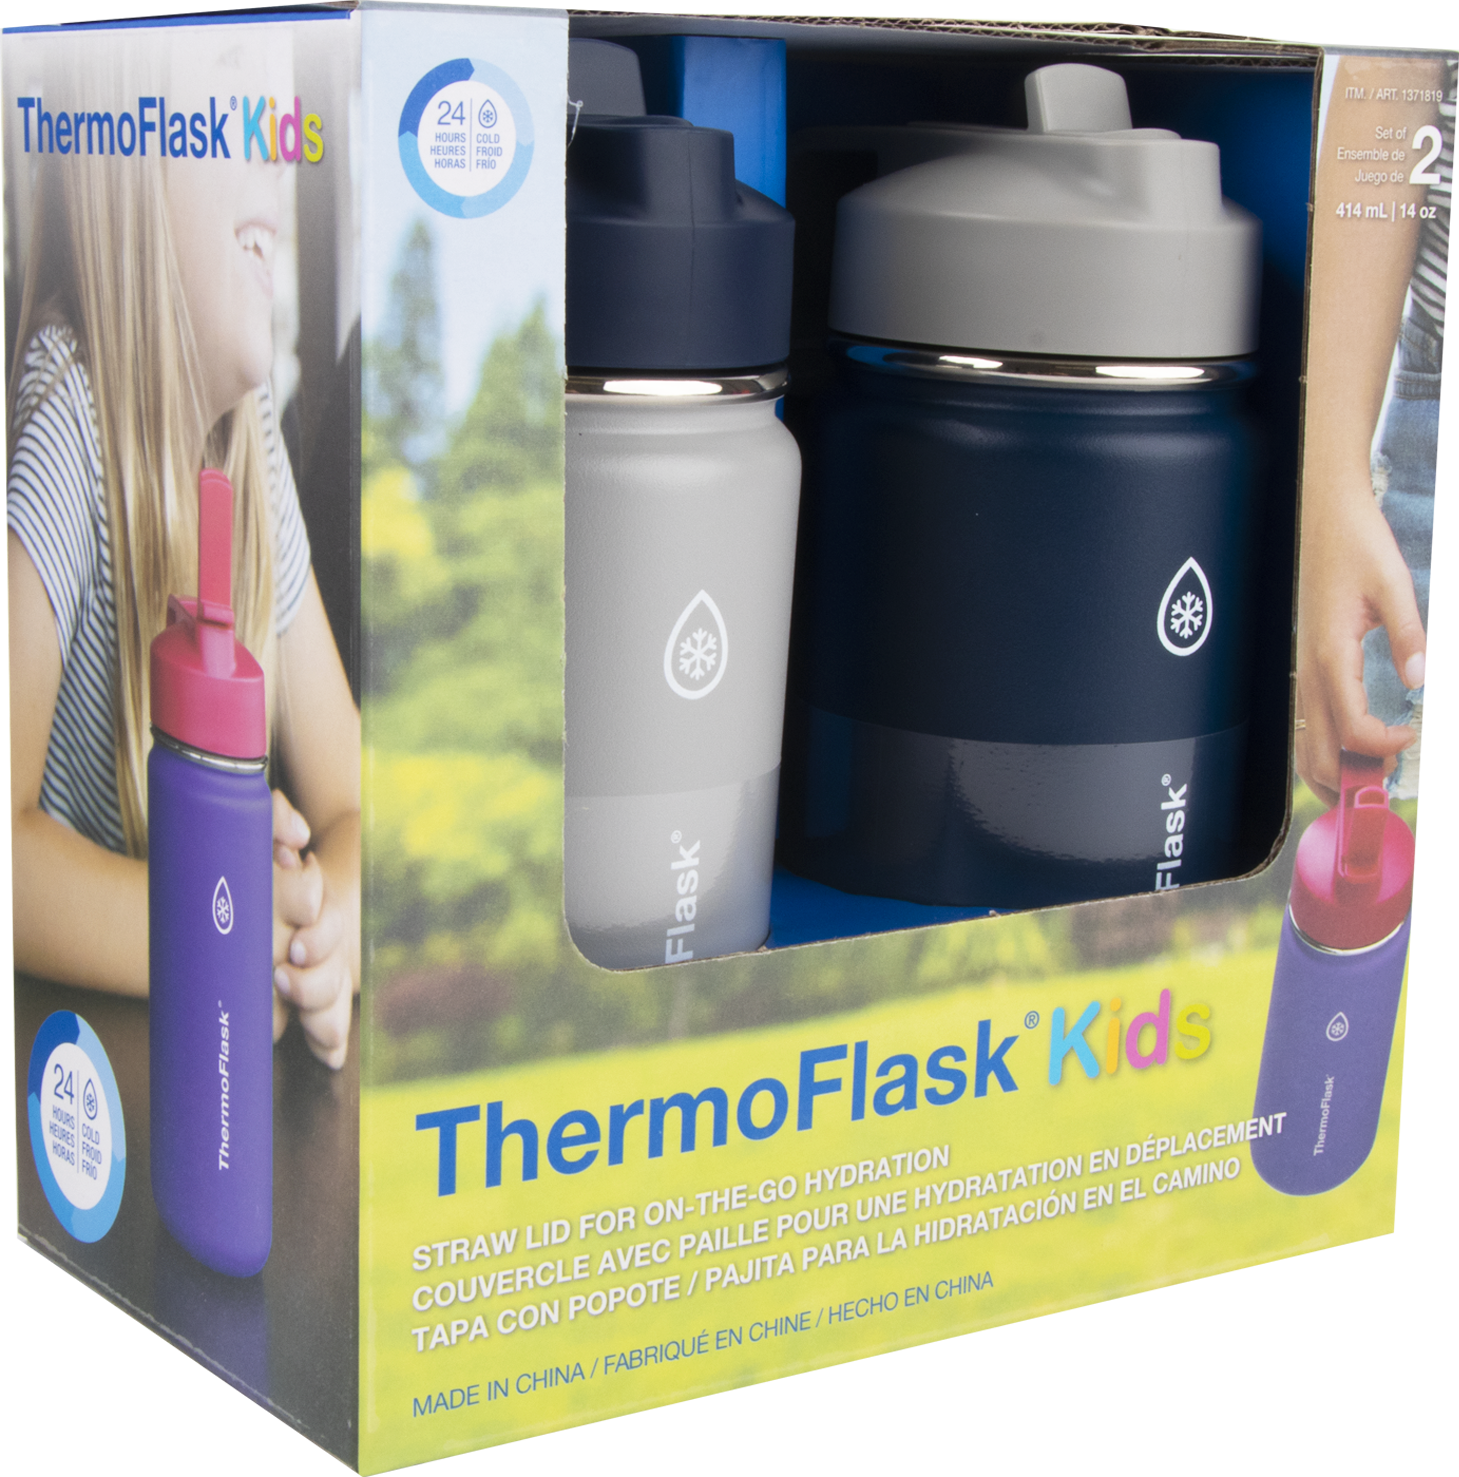 Thermoflask Stainless Steel Kids 14oz Straw Bottle 2pk Punch,Eggplant